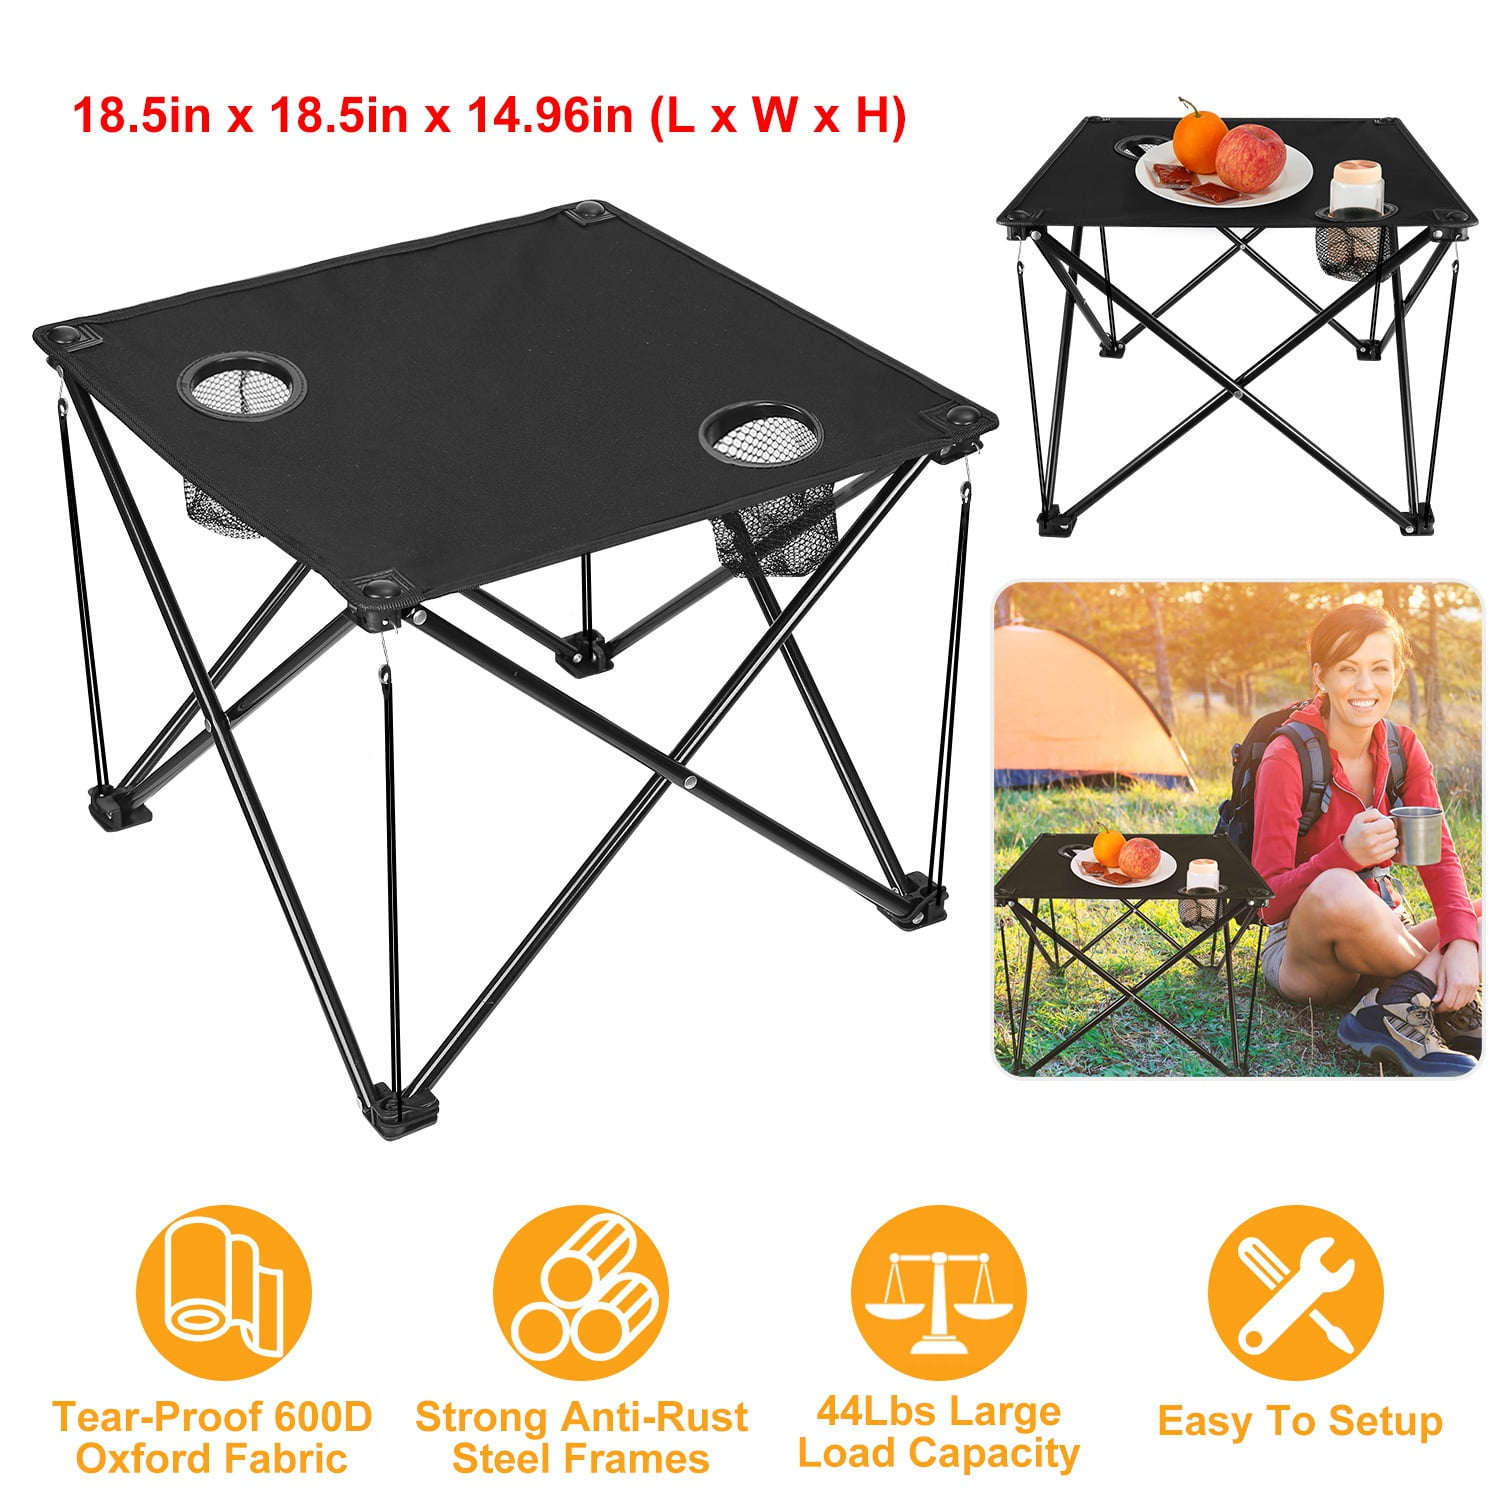 Table Folding Camping Portable Cup Holder Outdoor Picnic Fishing BBQ w/Carry Bag 